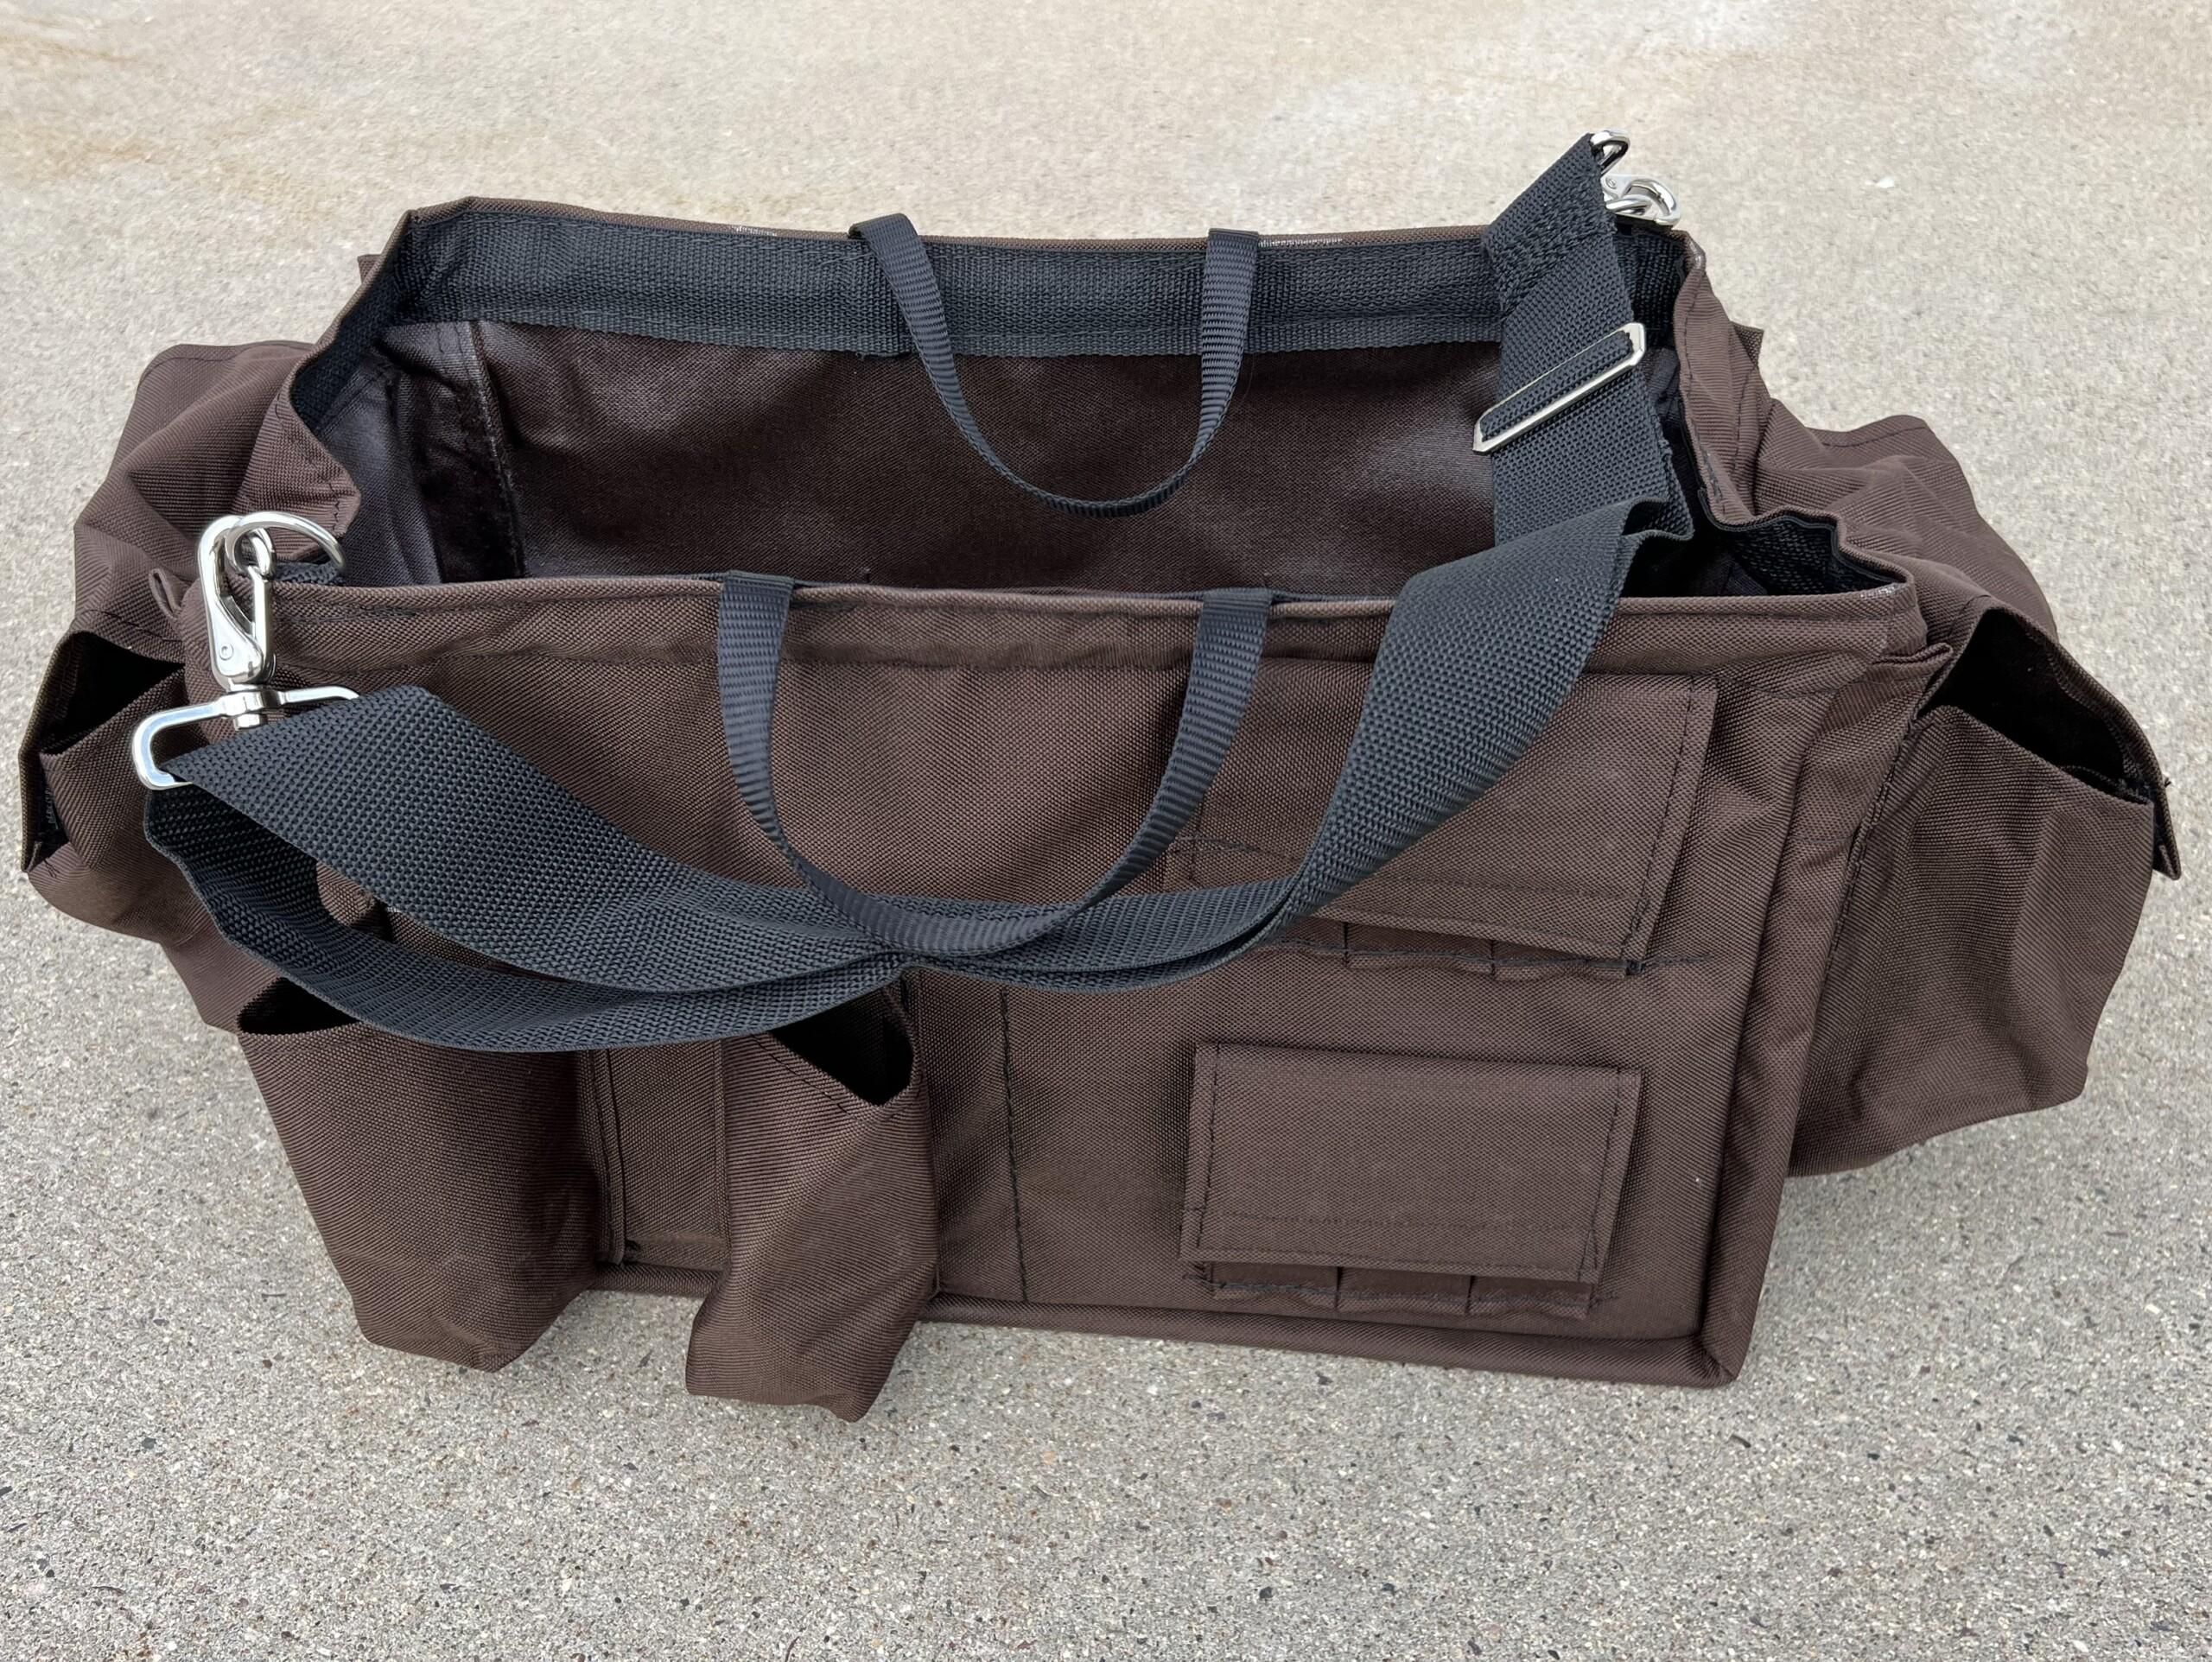 Northern's Trappers Tote